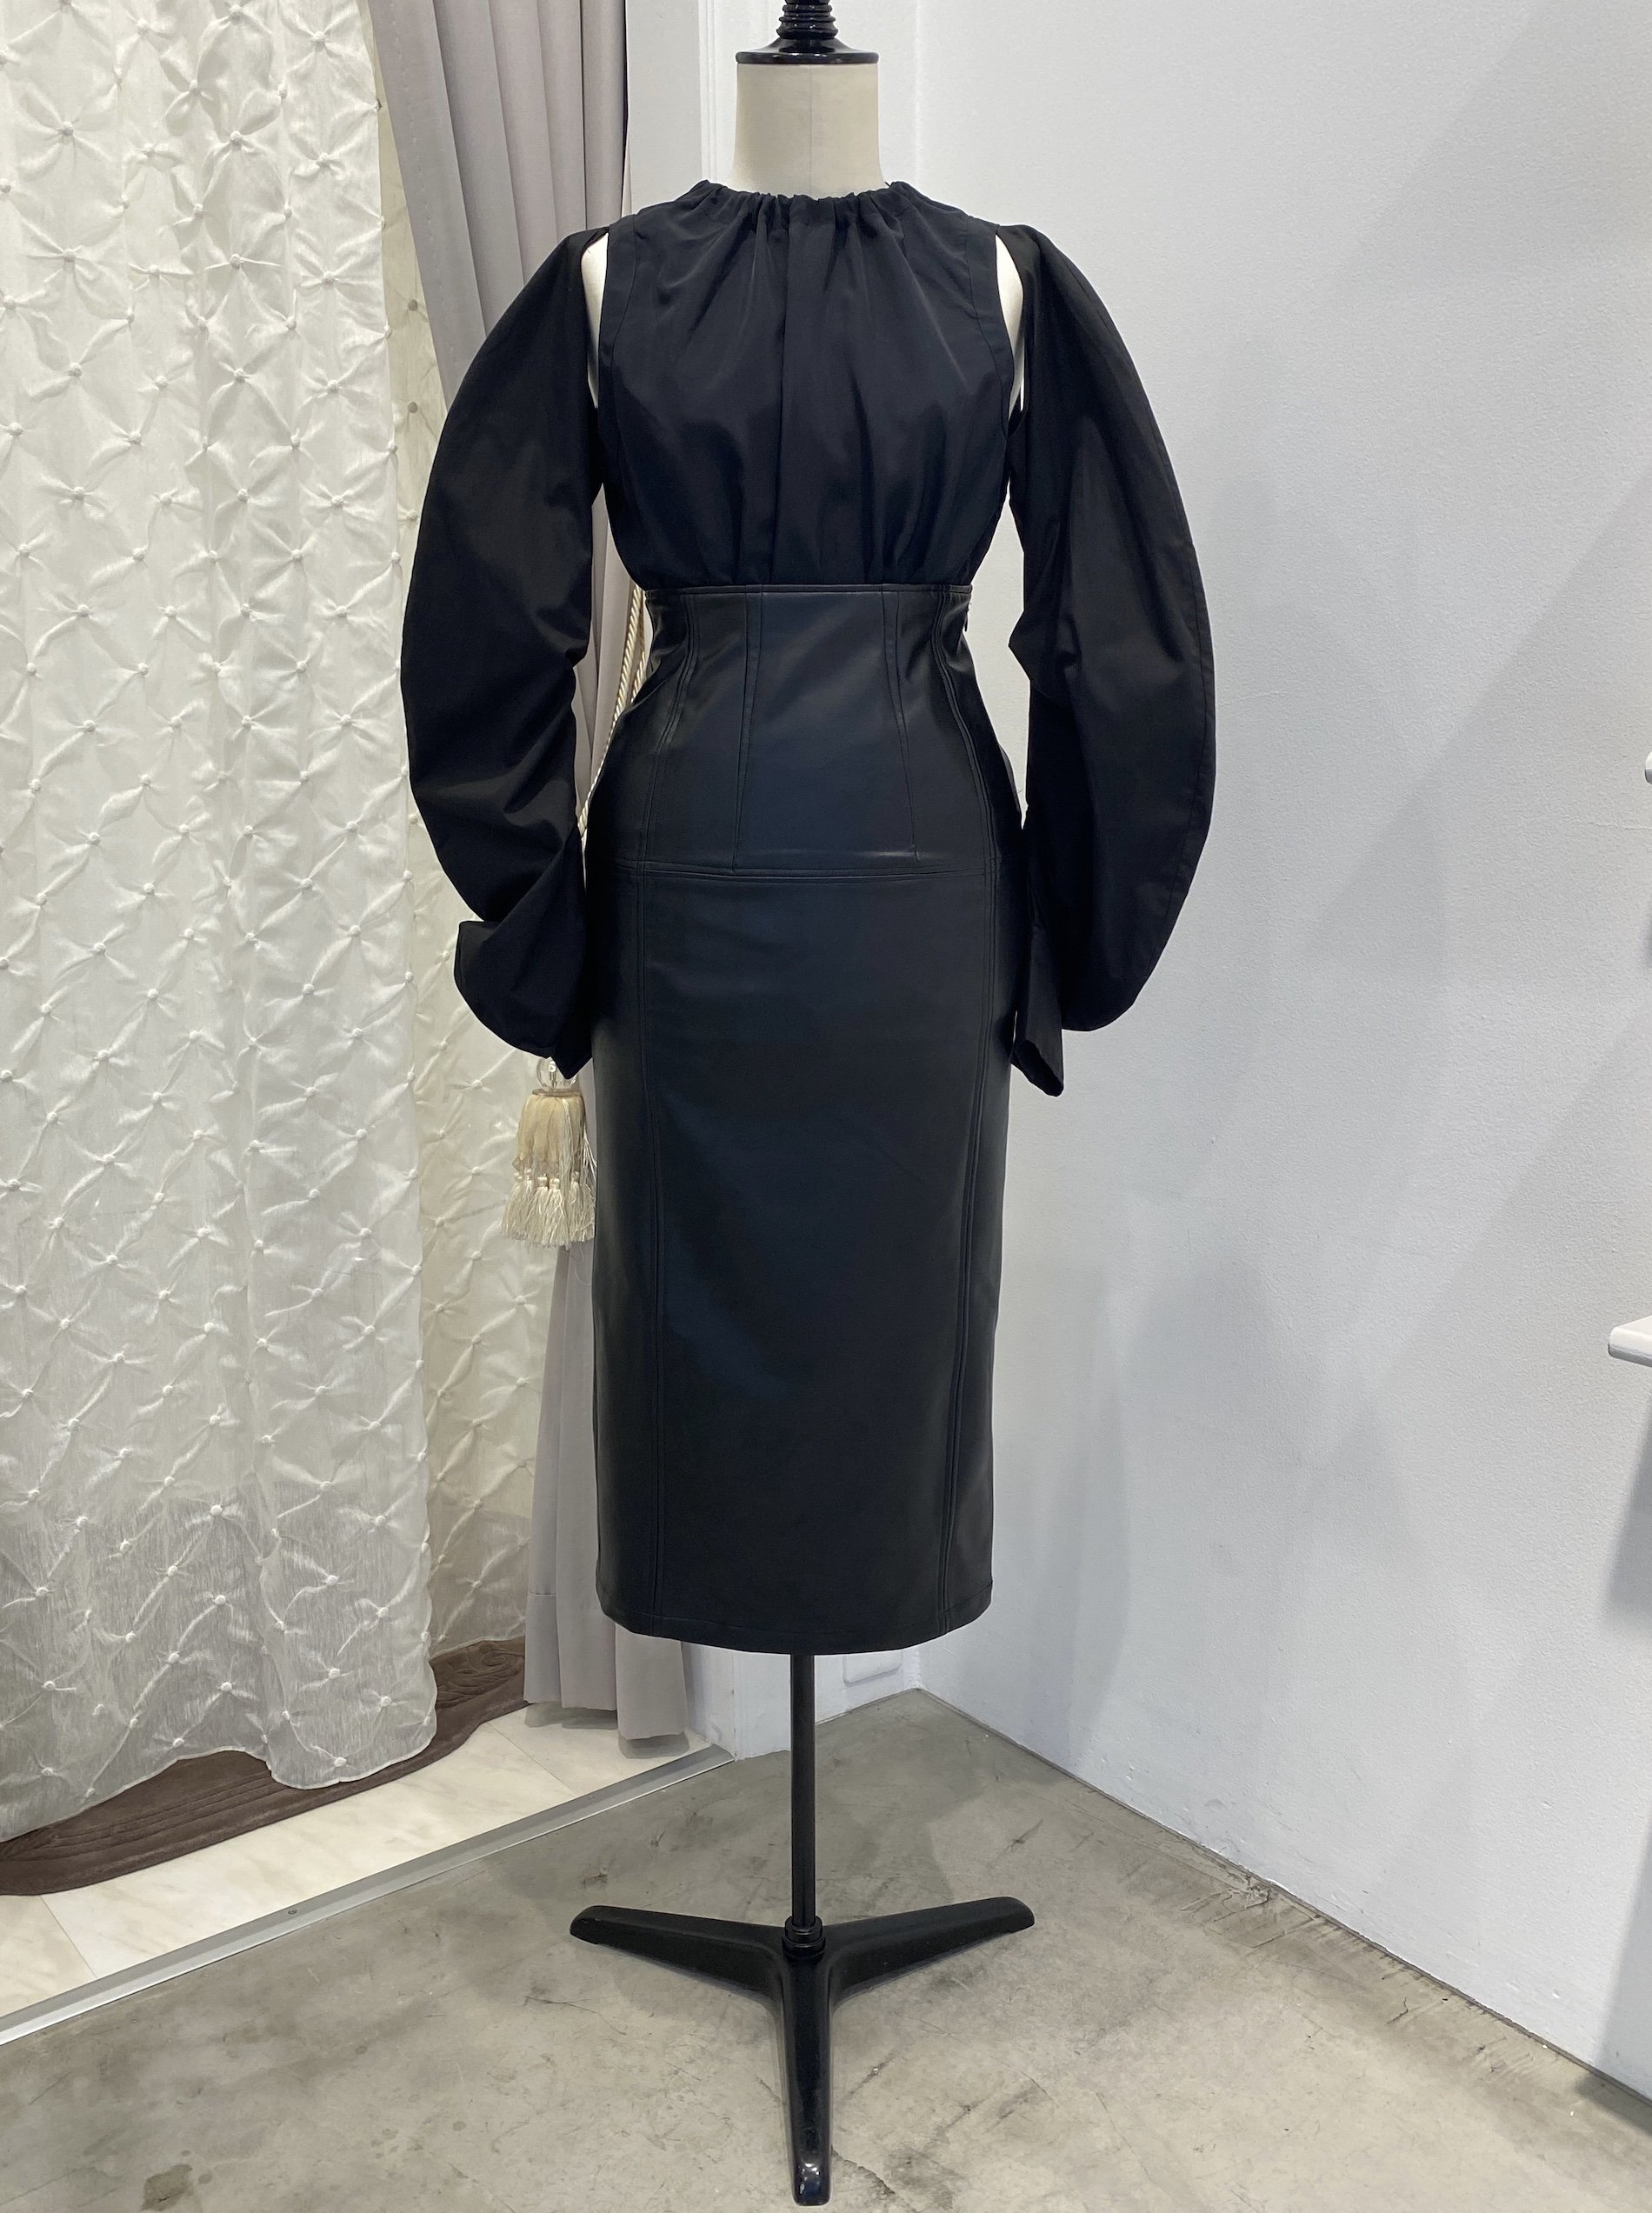 <img class='new_mark_img1' src='https://img.shop-pro.jp/img/new/icons8.gif' style='border:none;display:inline;margin:0px;padding:0px;width:auto;' />f's6 original Leather skirt / Black 